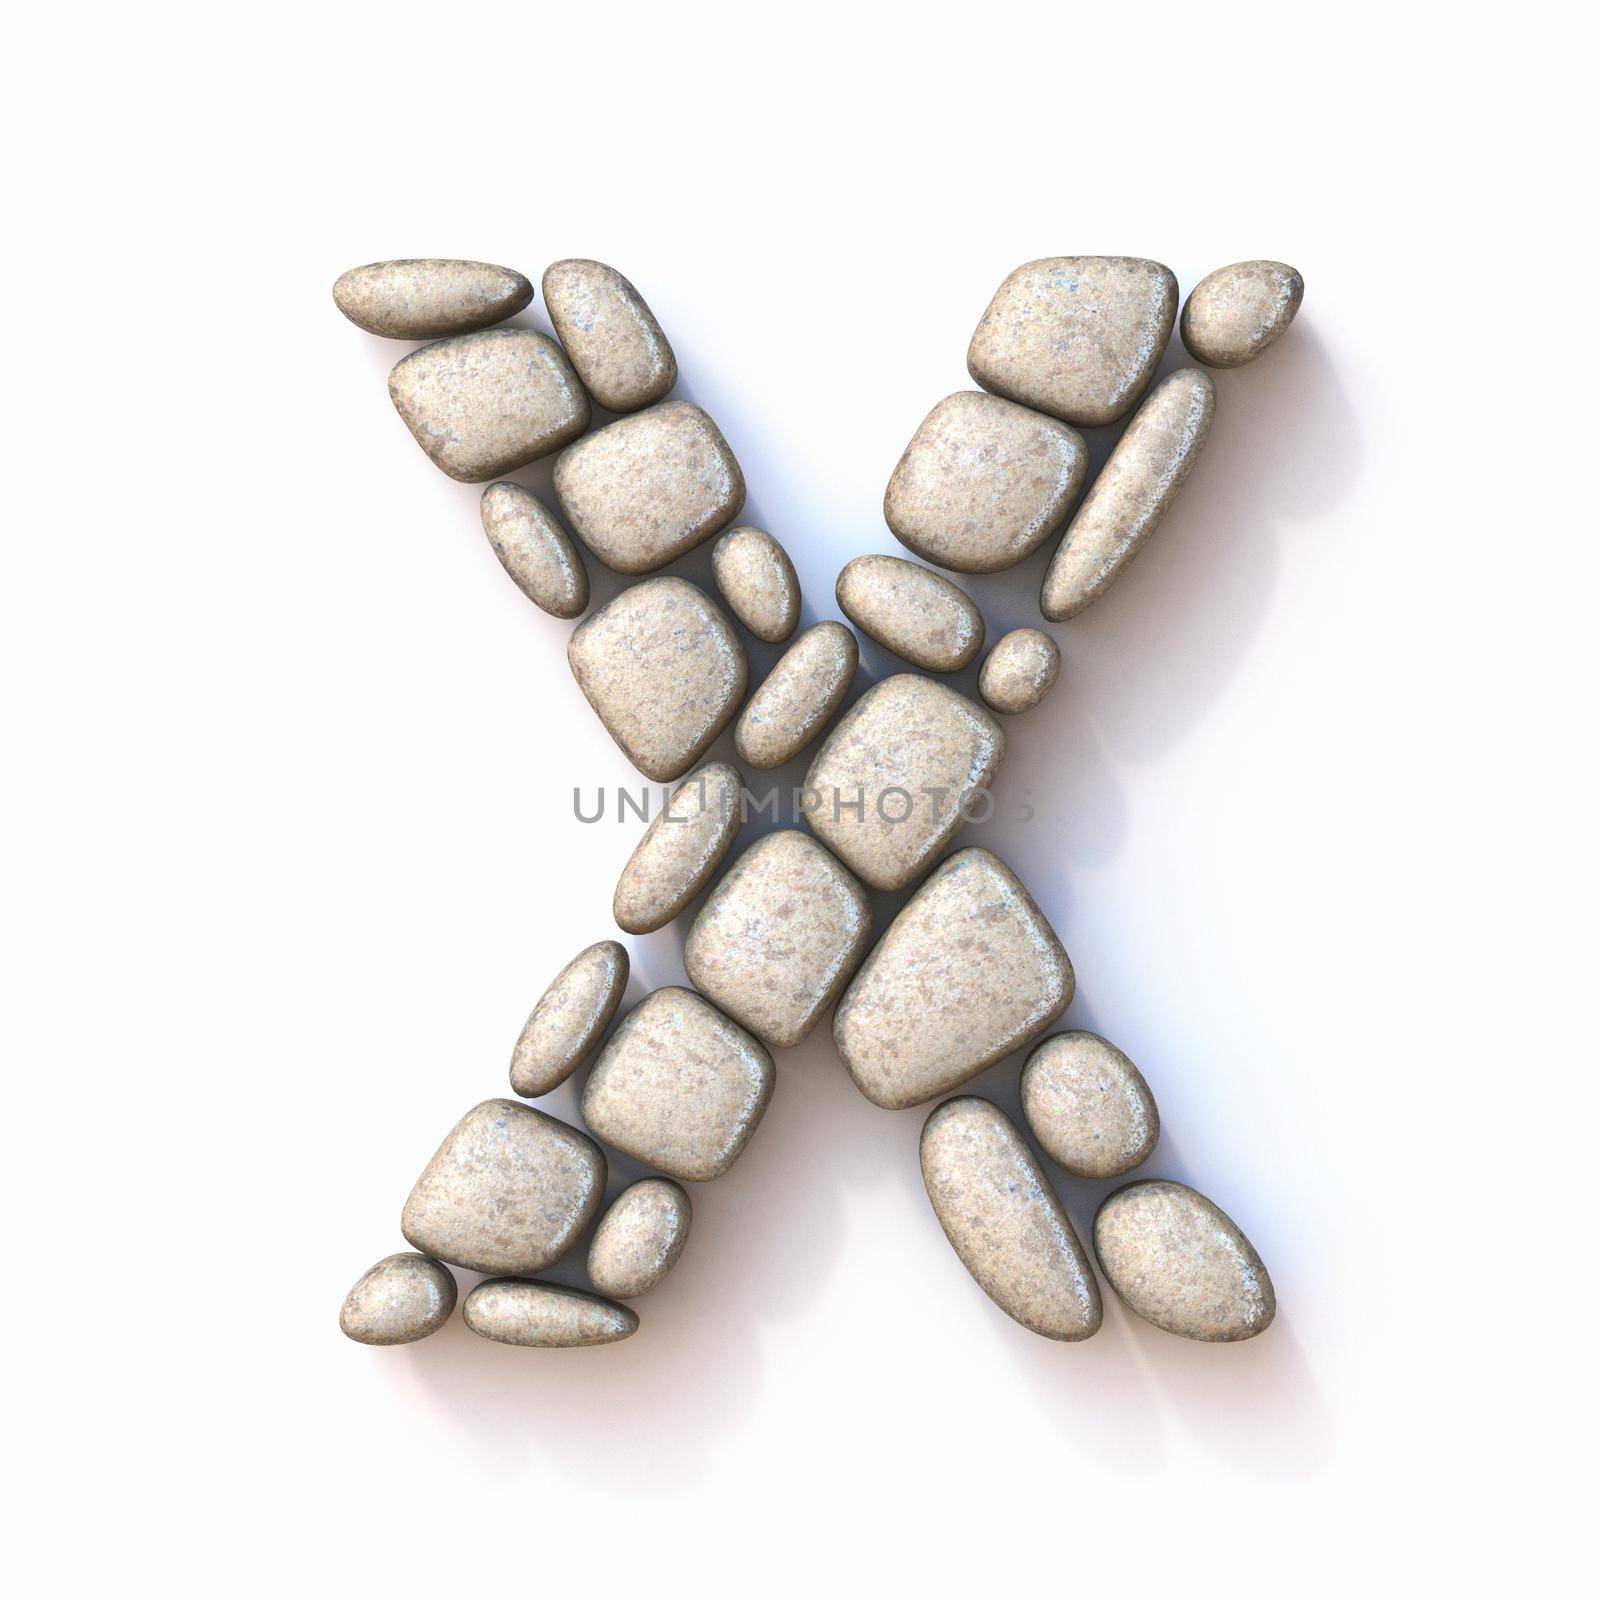 Pebble font Letter X 3D rendering illustration isolated on white background